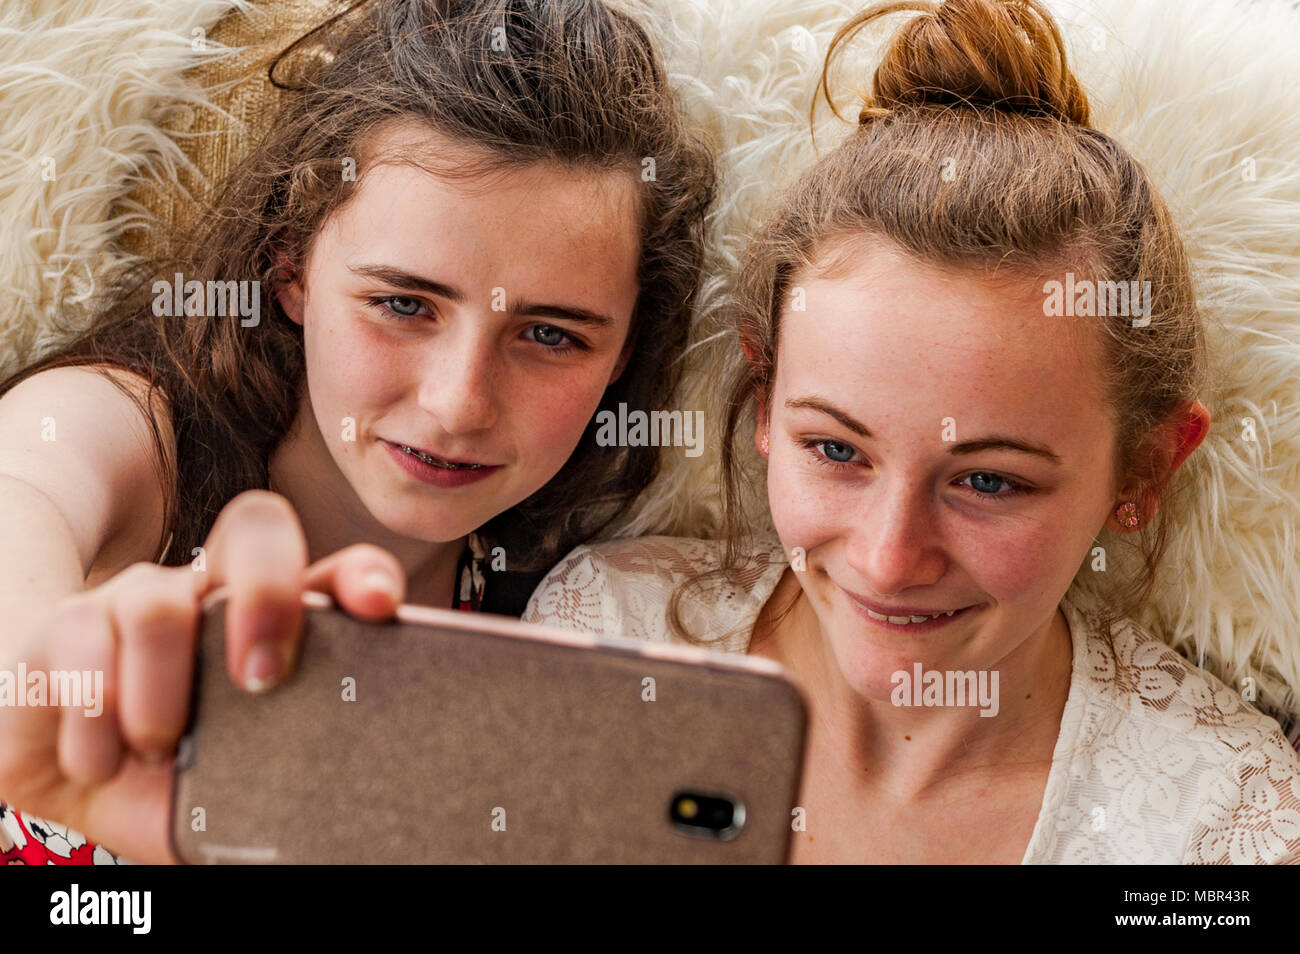 Two happy teenage girls taking a selfie indoors with a smartphone. Stock Photo